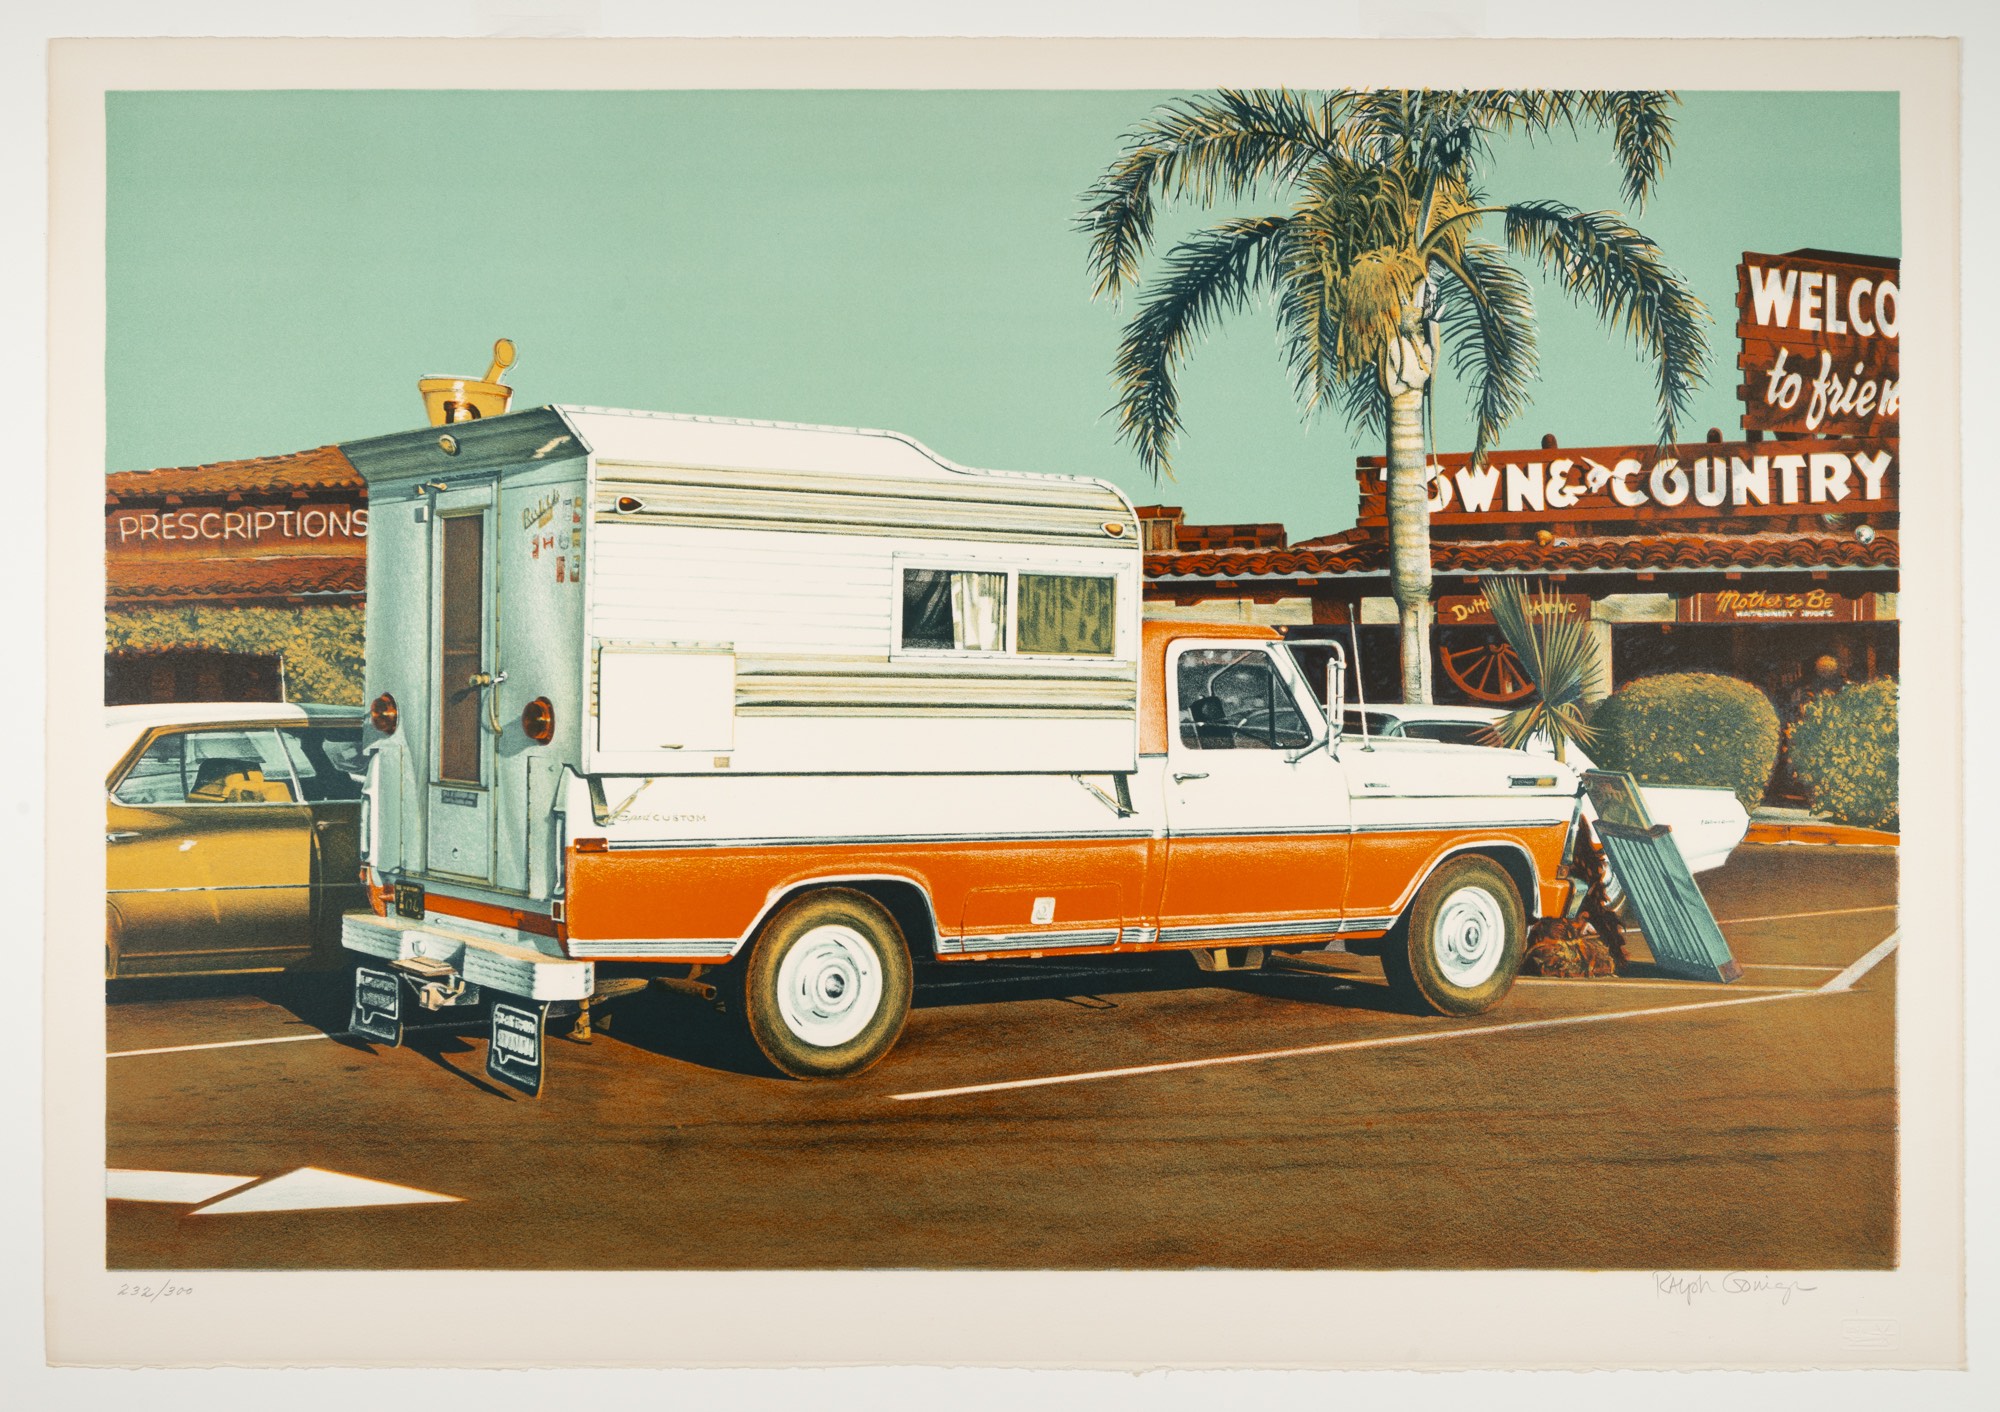 Ralph Goings, “Camper,” from “Documenta: The Super-Realists” 1972, five-color lithograph, 60.5 cm x 87.3 cm (23 13/16 in. x 34 3/8 in.). Gift of Samuel S. Mandel, M.D., 1985